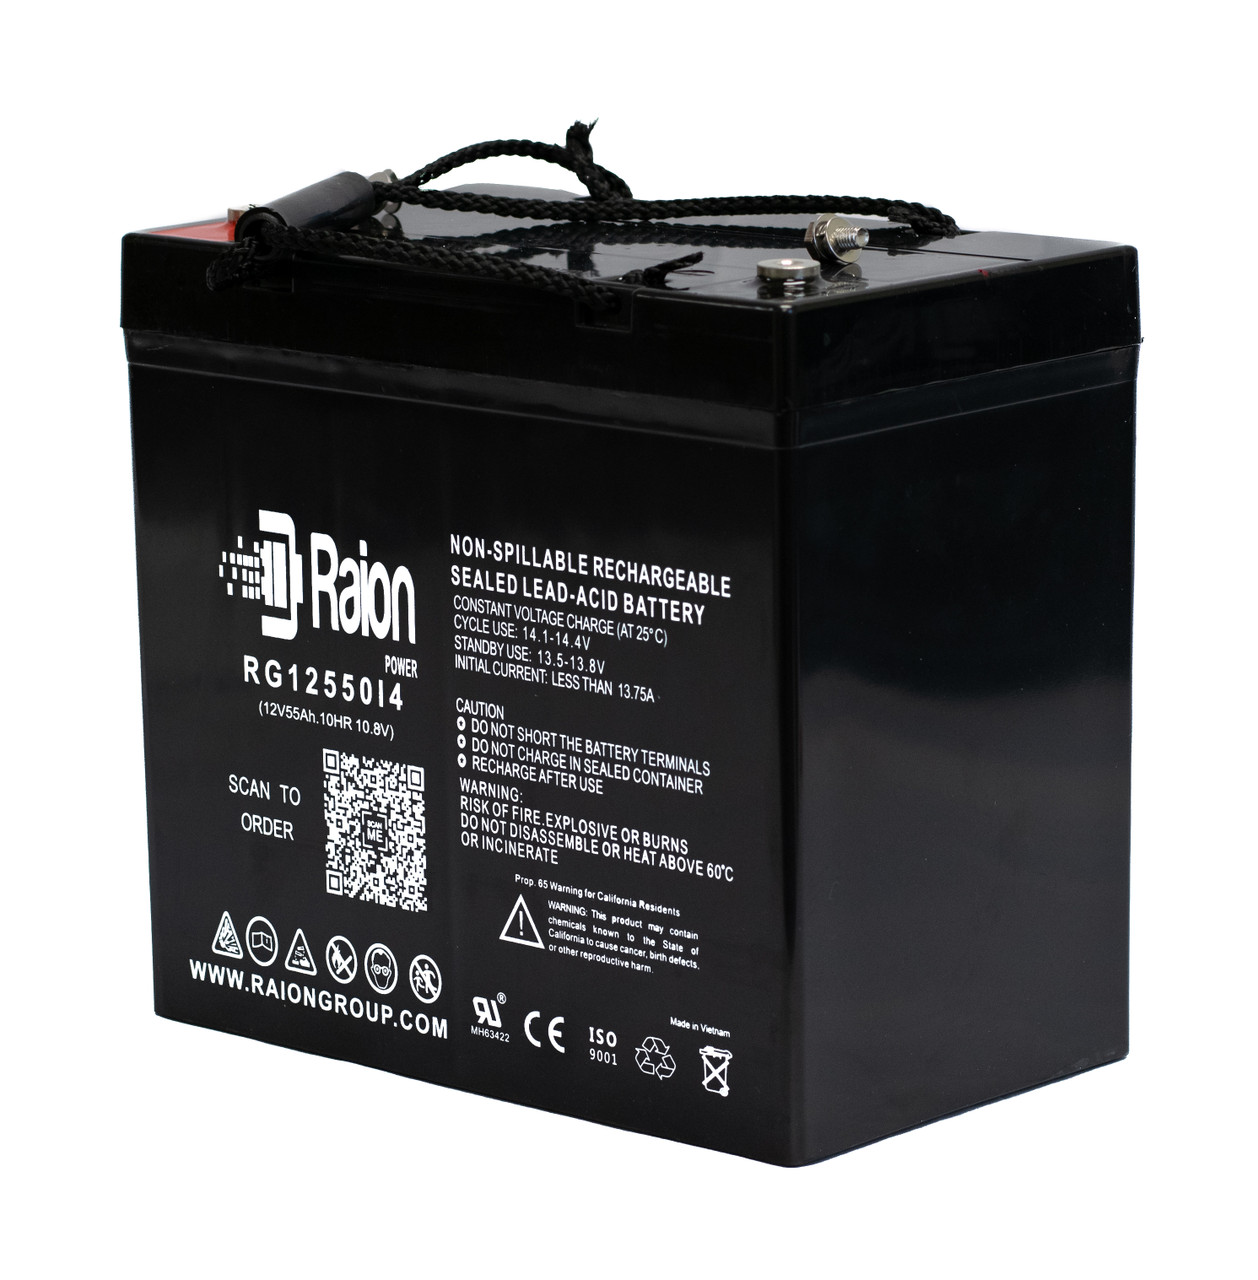 Raion Power 12V 55Ah 22NF Mobility Scooter Battery Replacement for Pride Jazzy 600 XL